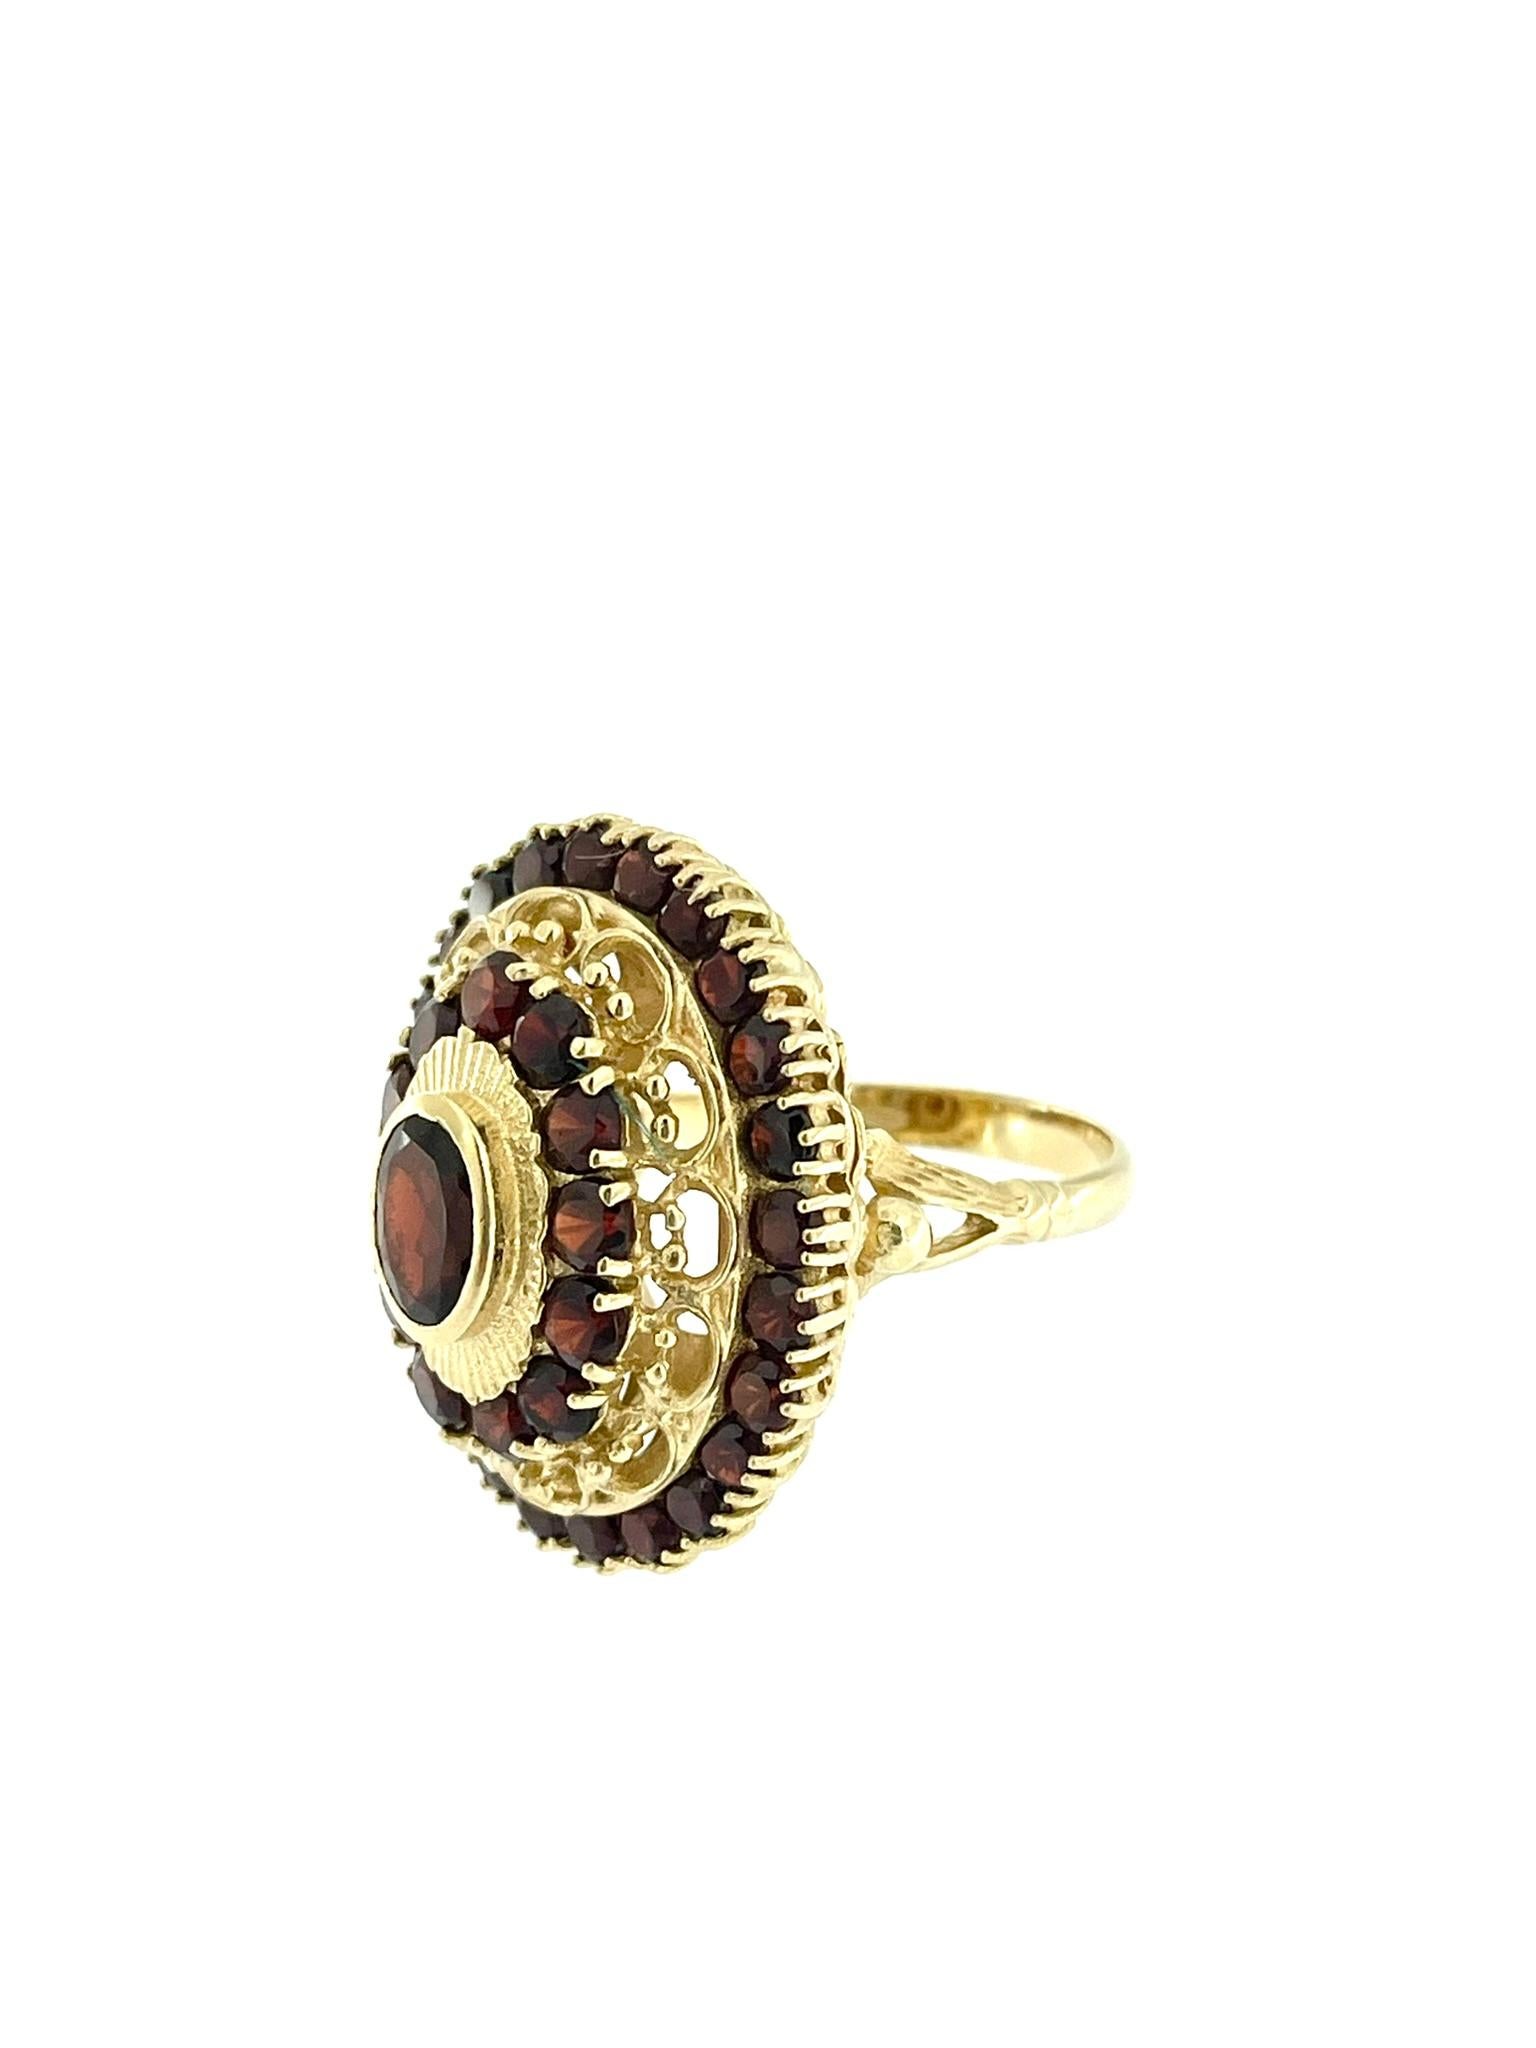 Belle-Epoque 18 karat Yellow Gold Princess Ring with Garnets For Sale 3